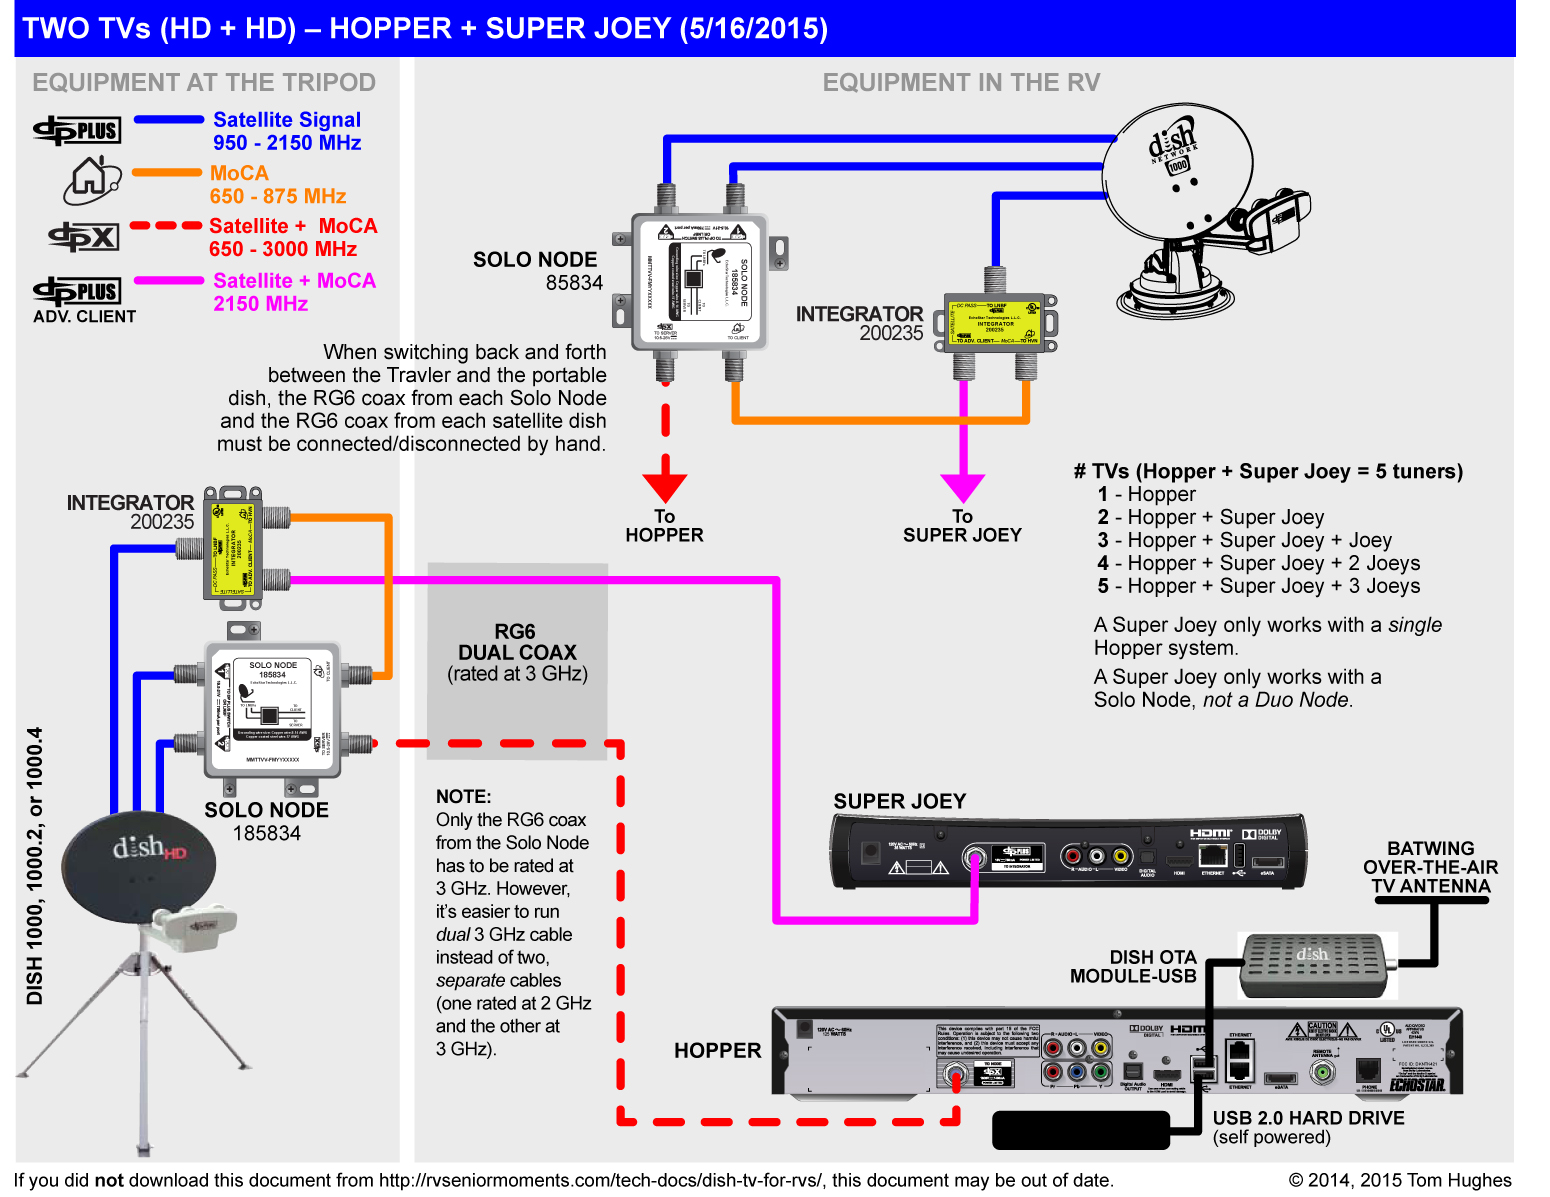 Can I Use High Frequency 3GHz Couplers on Dish Hopper Setup? - iRV2 Forums